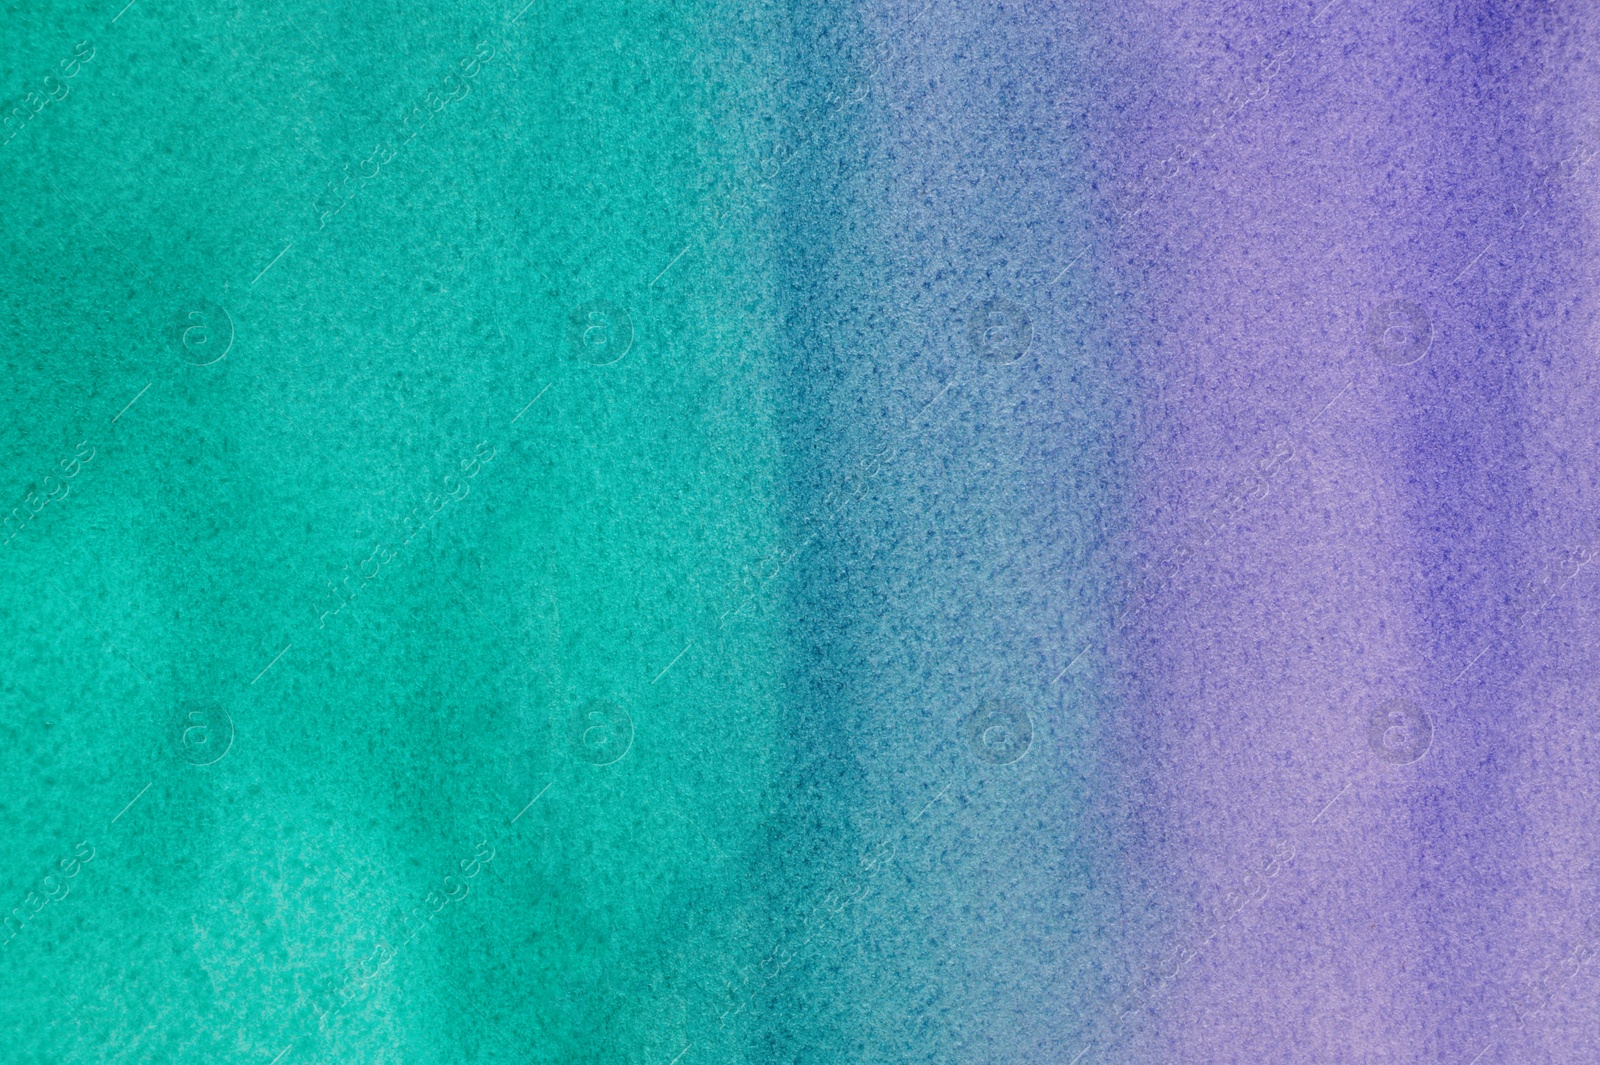 Photo of Abstract purple and green watercolor painting as background, top view